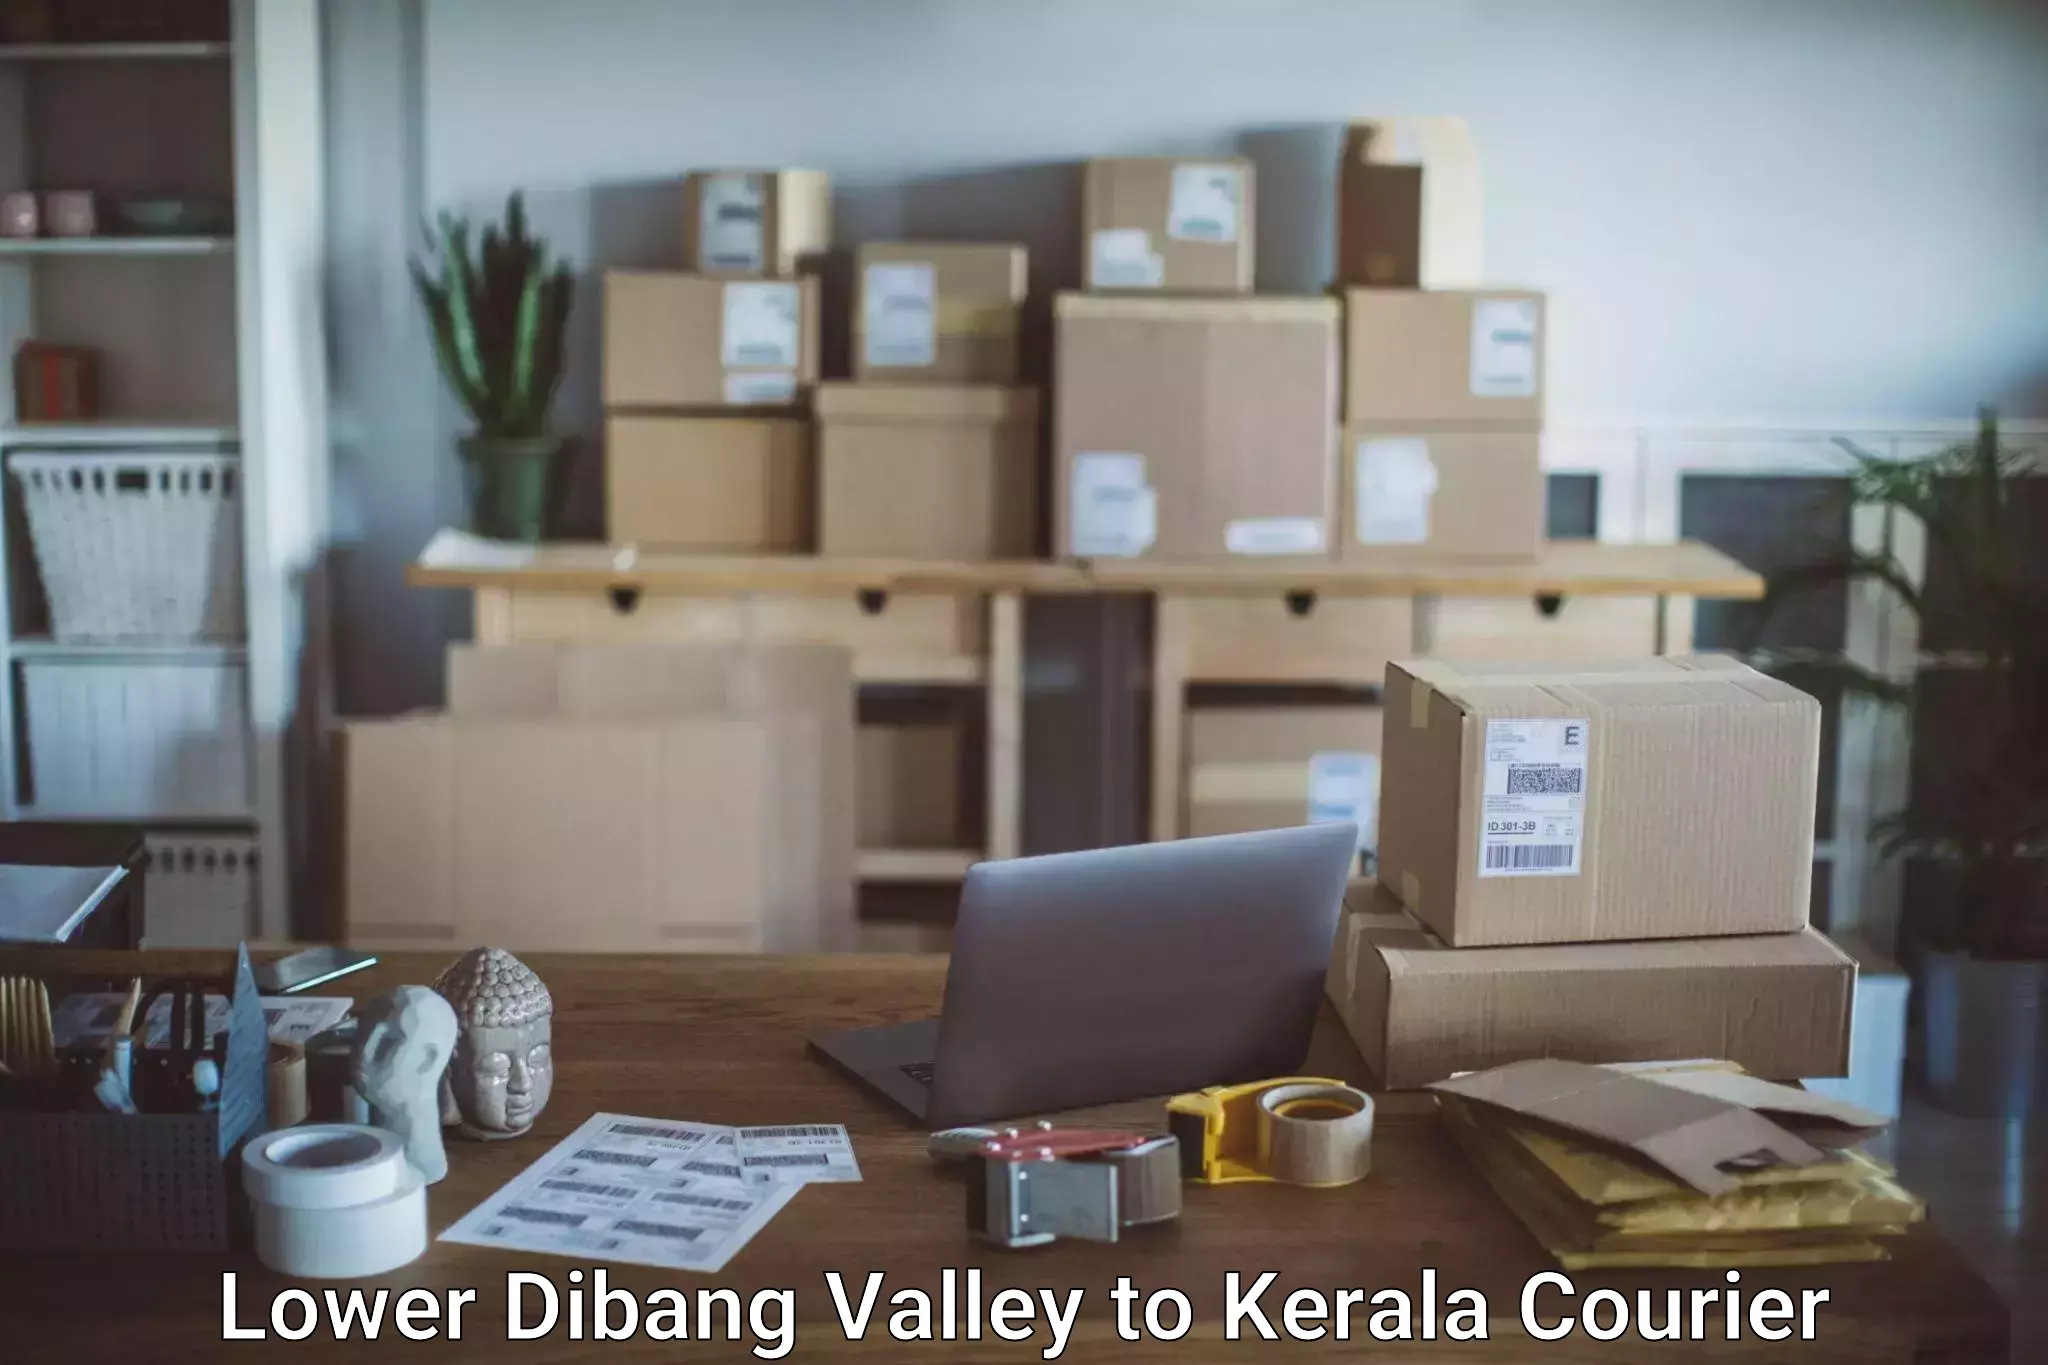 Door-to-door baggage service Lower Dibang Valley to Cochin University of Science and Technology